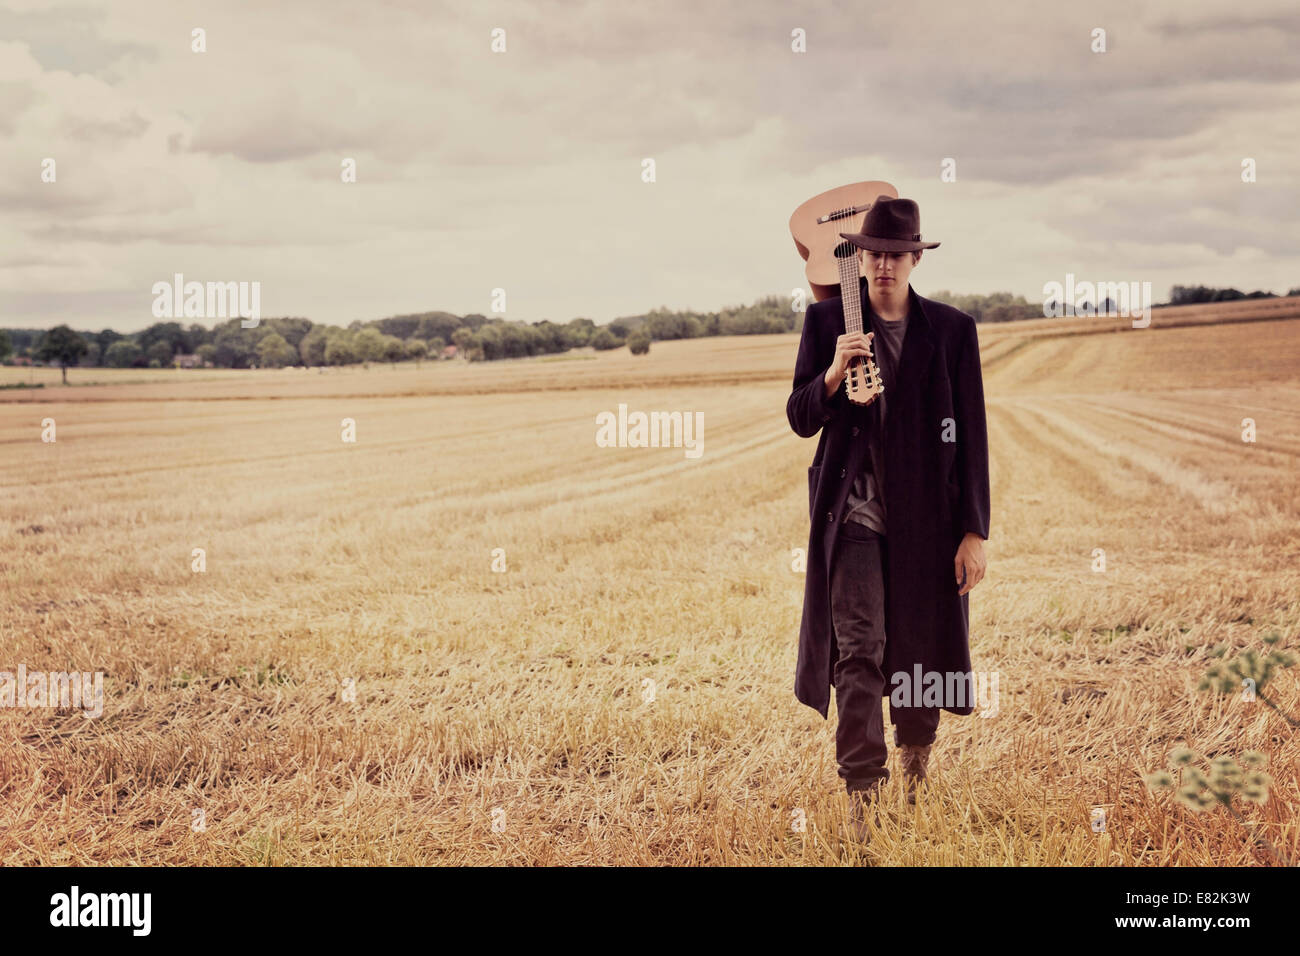 Teenage boy with hat and long coat walking on a grainfield with guitar Stock Photo